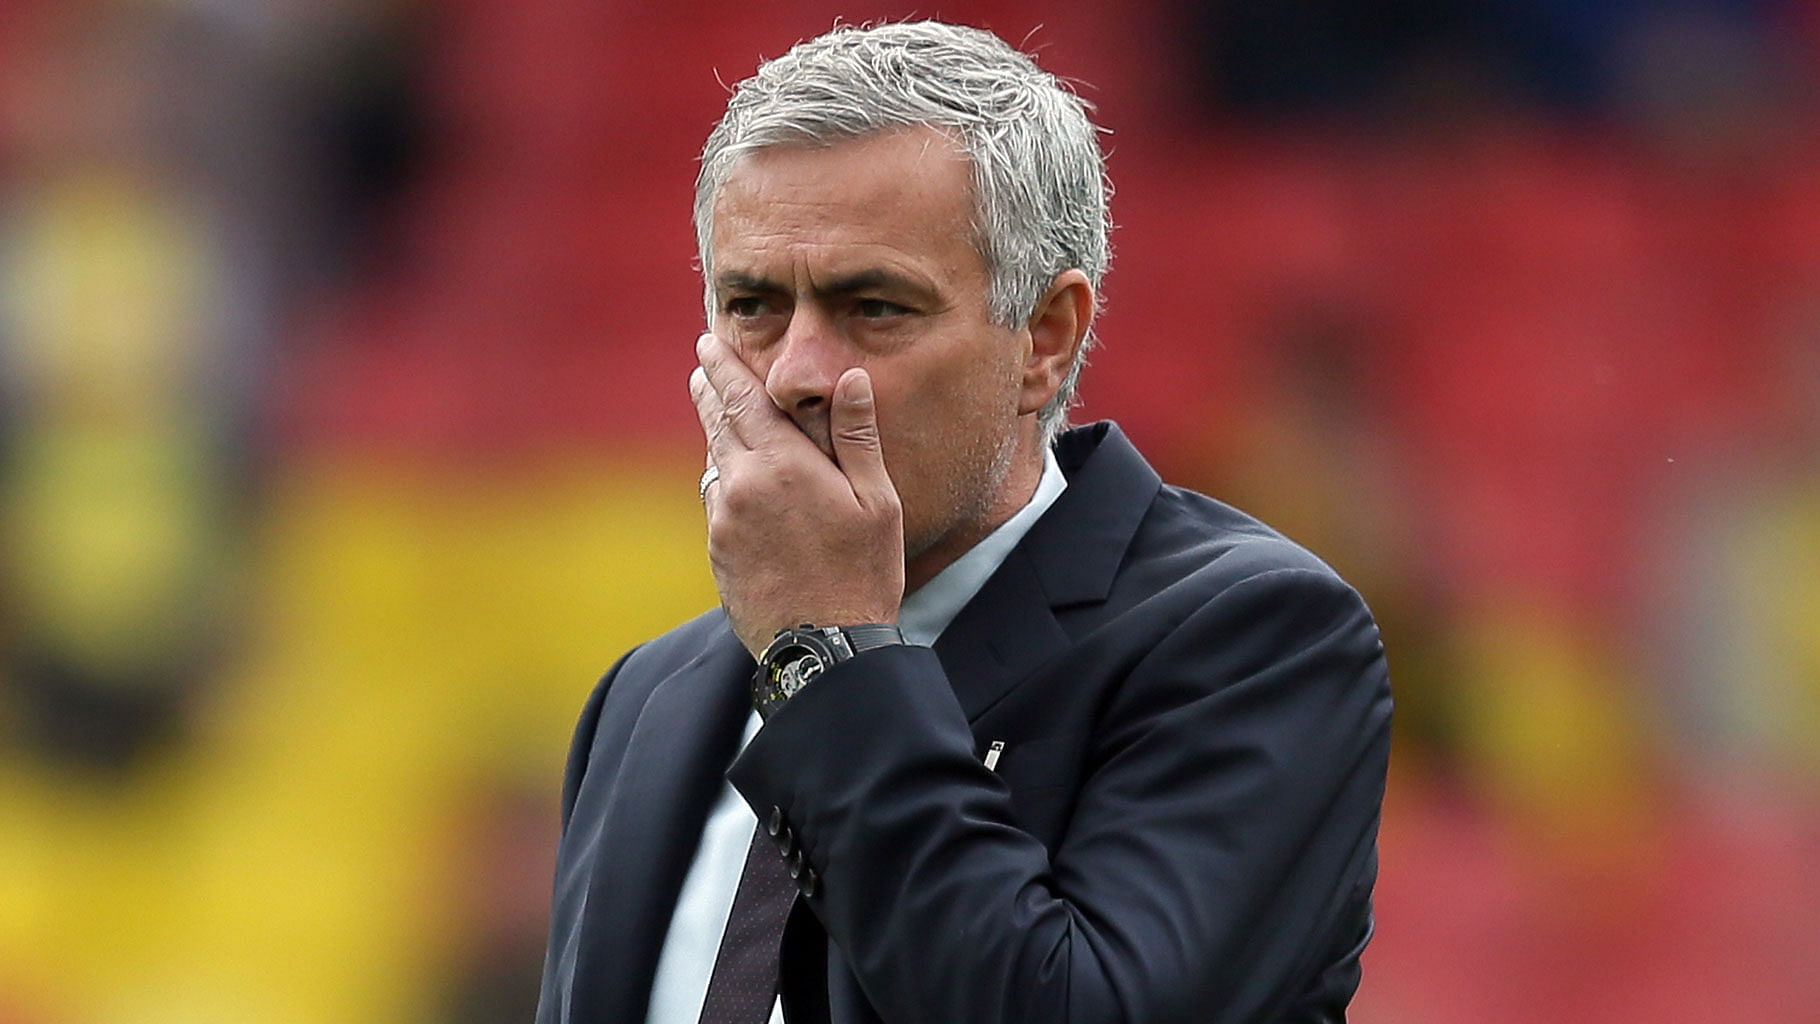 Ex-Manchester United manager Jose Mourinho has avoided jail for tax fraud as part of a deal with Spanish prosecutors.